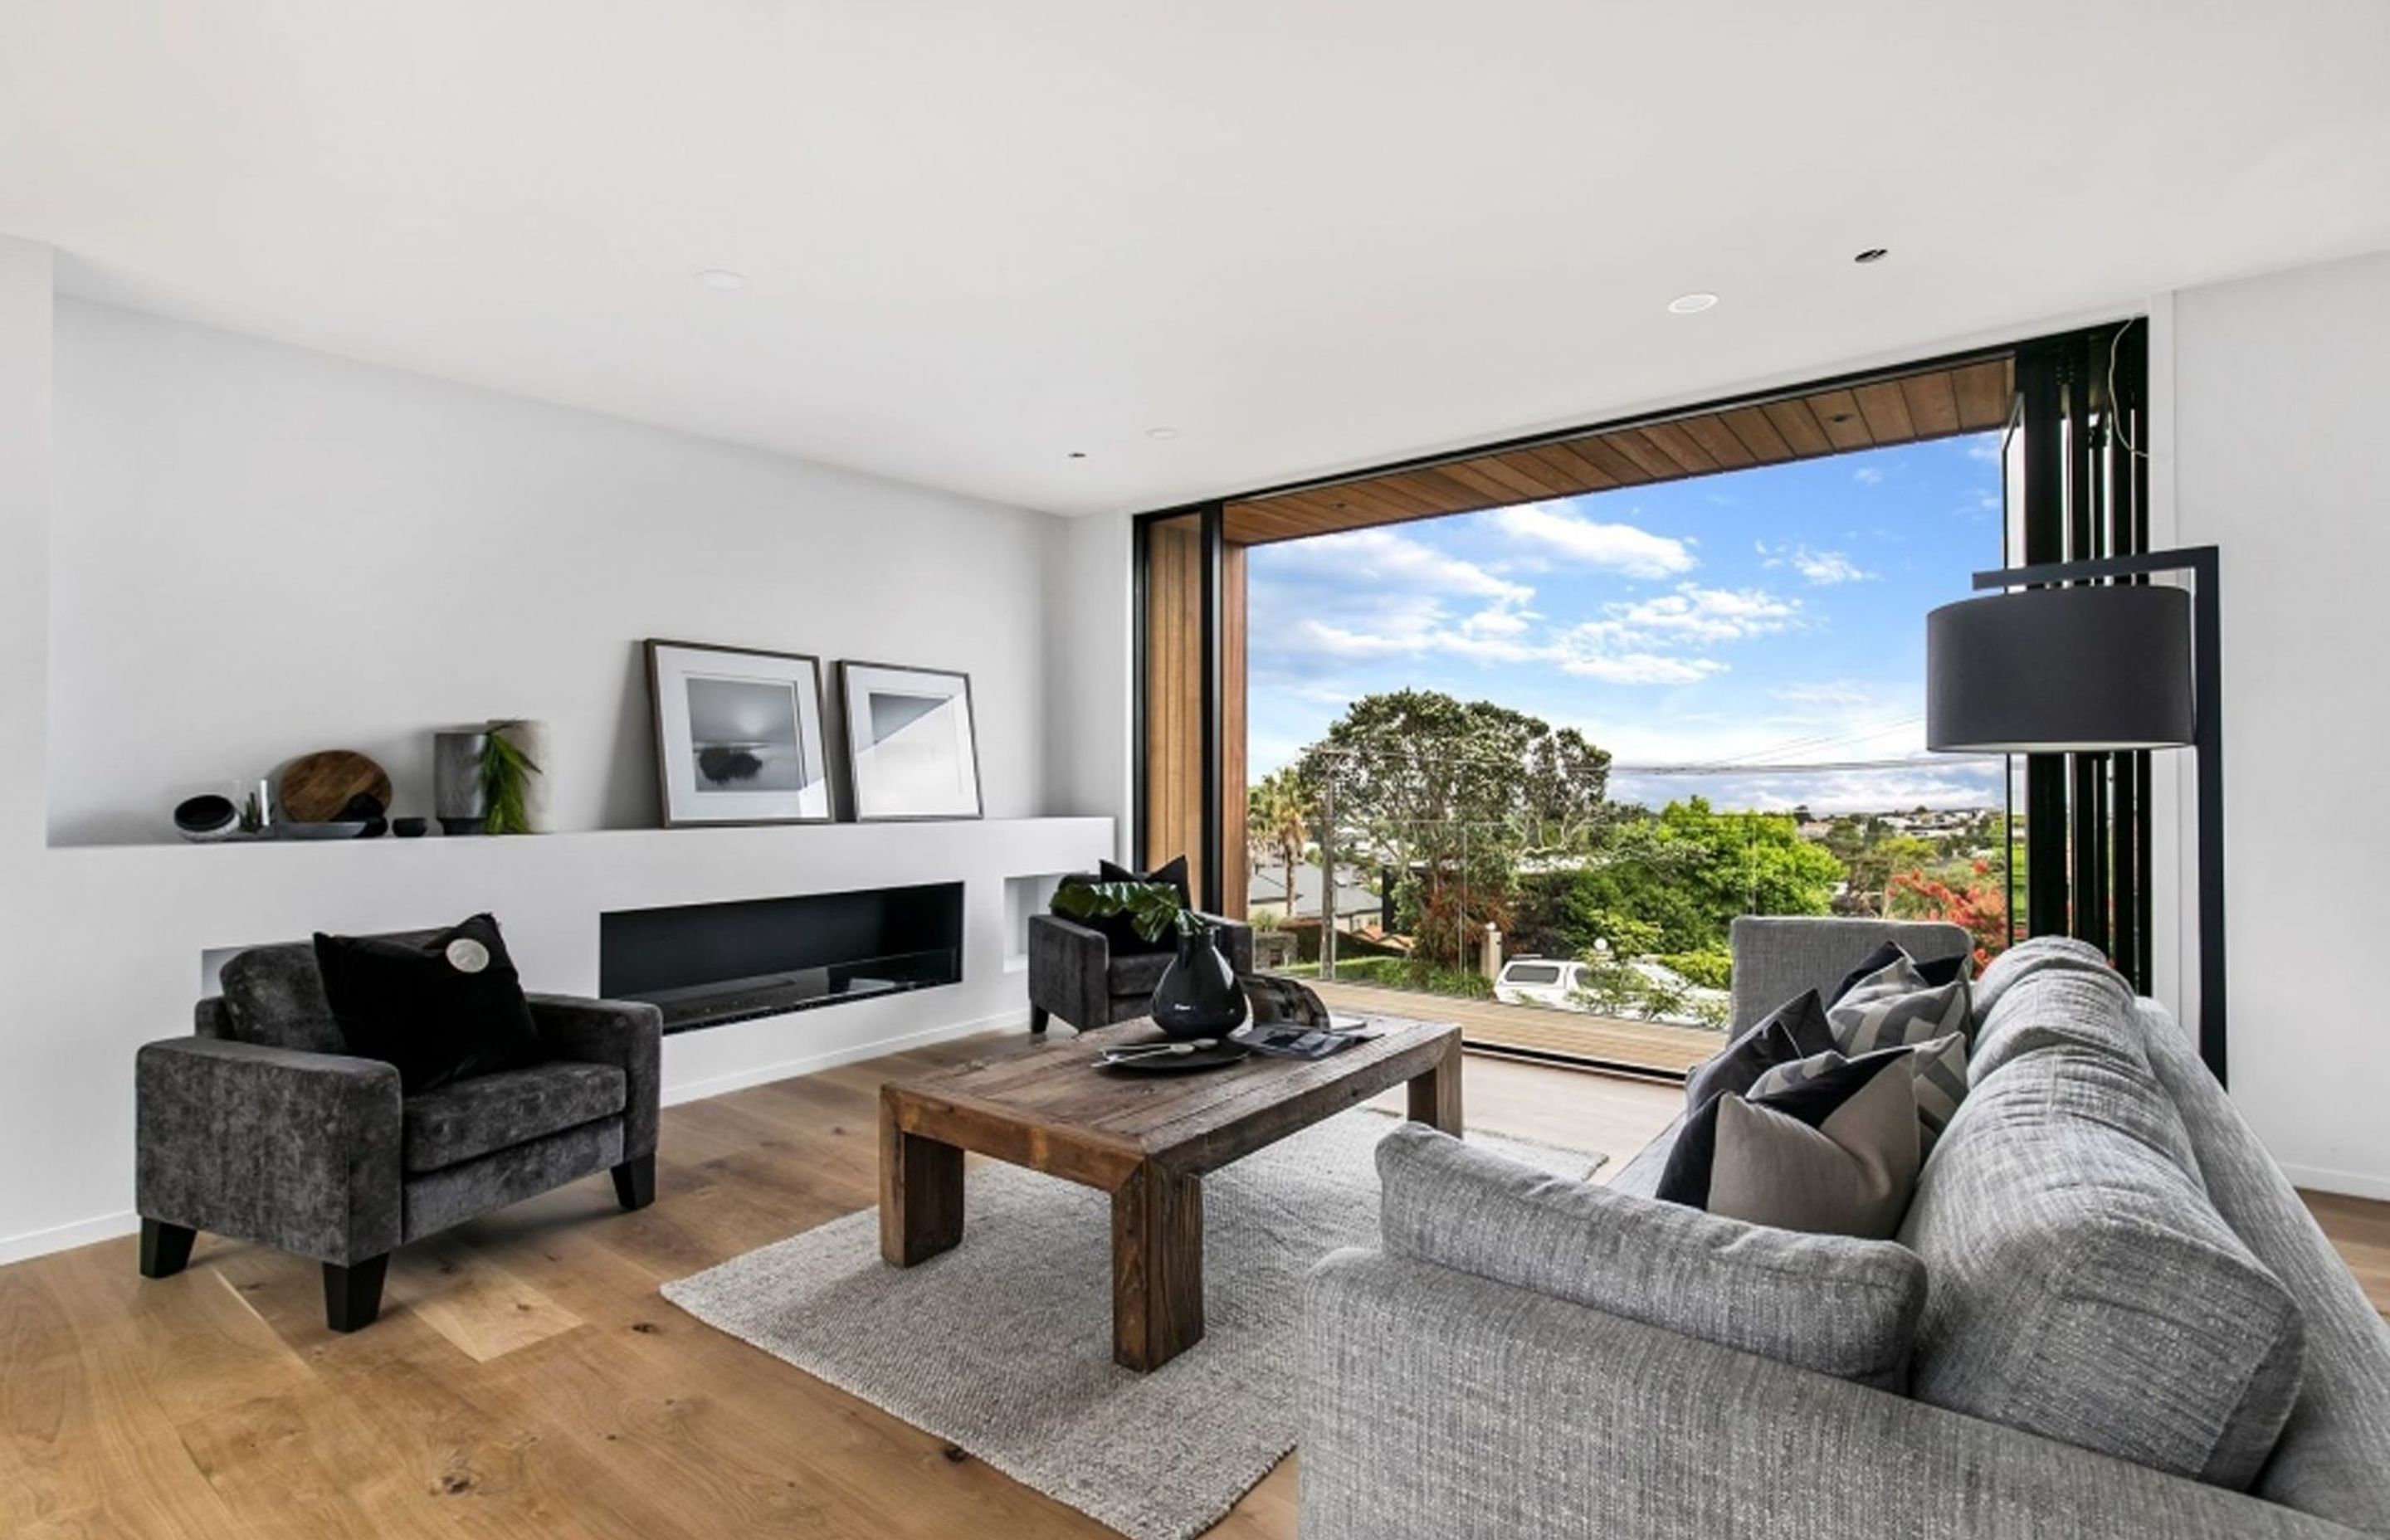 The north-facing balcony takes in the view over the neighbouring suburb and further afield towards Rangitoto.